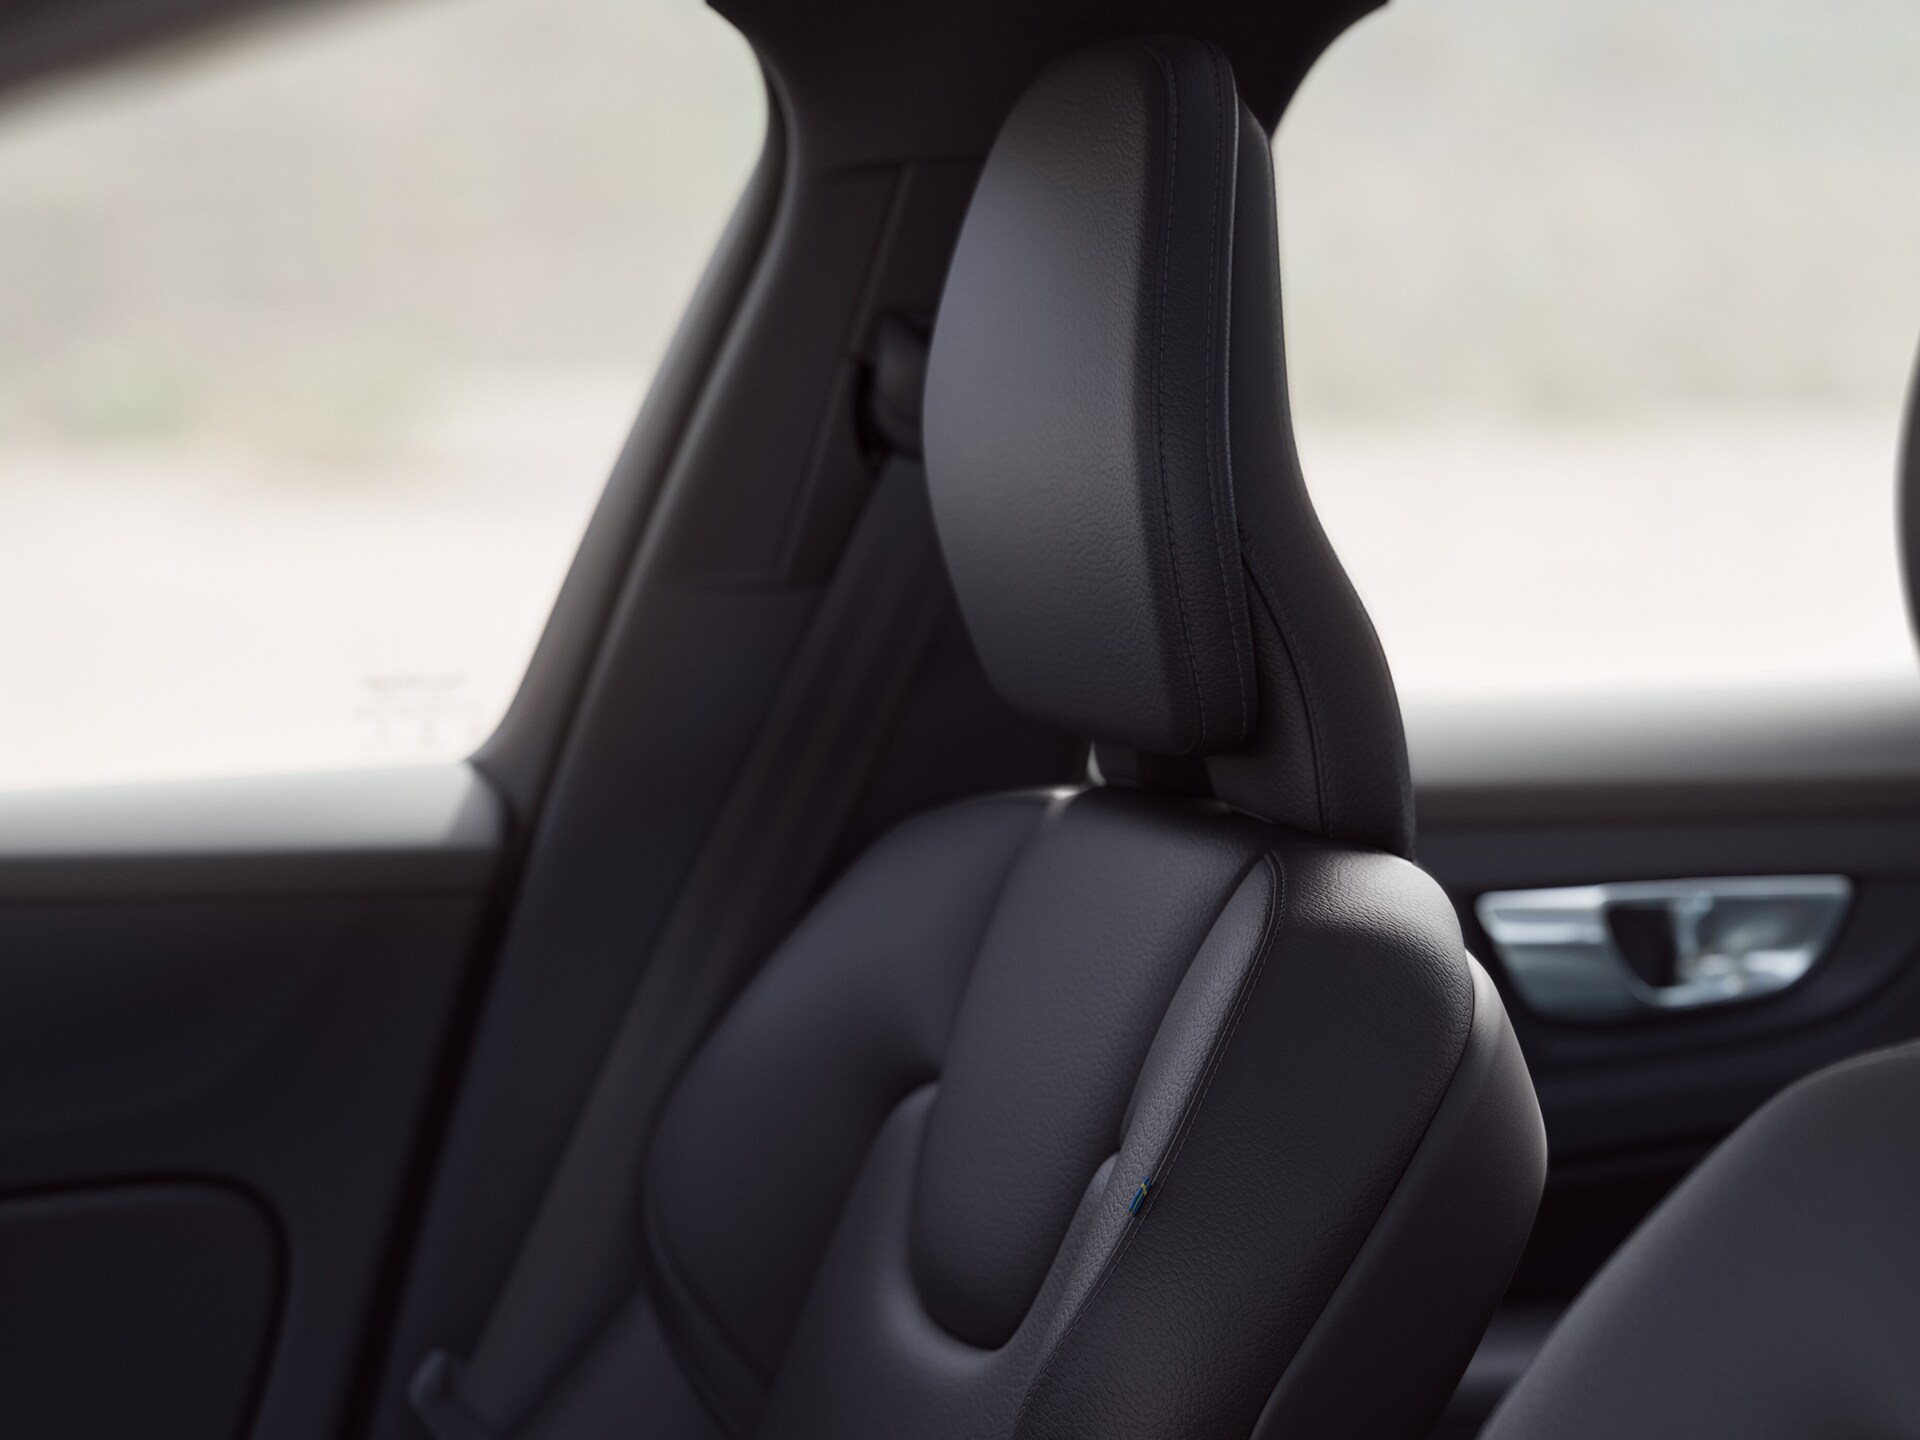 Close-up of an ergonomic upholstered seat in a Volvo sedan.